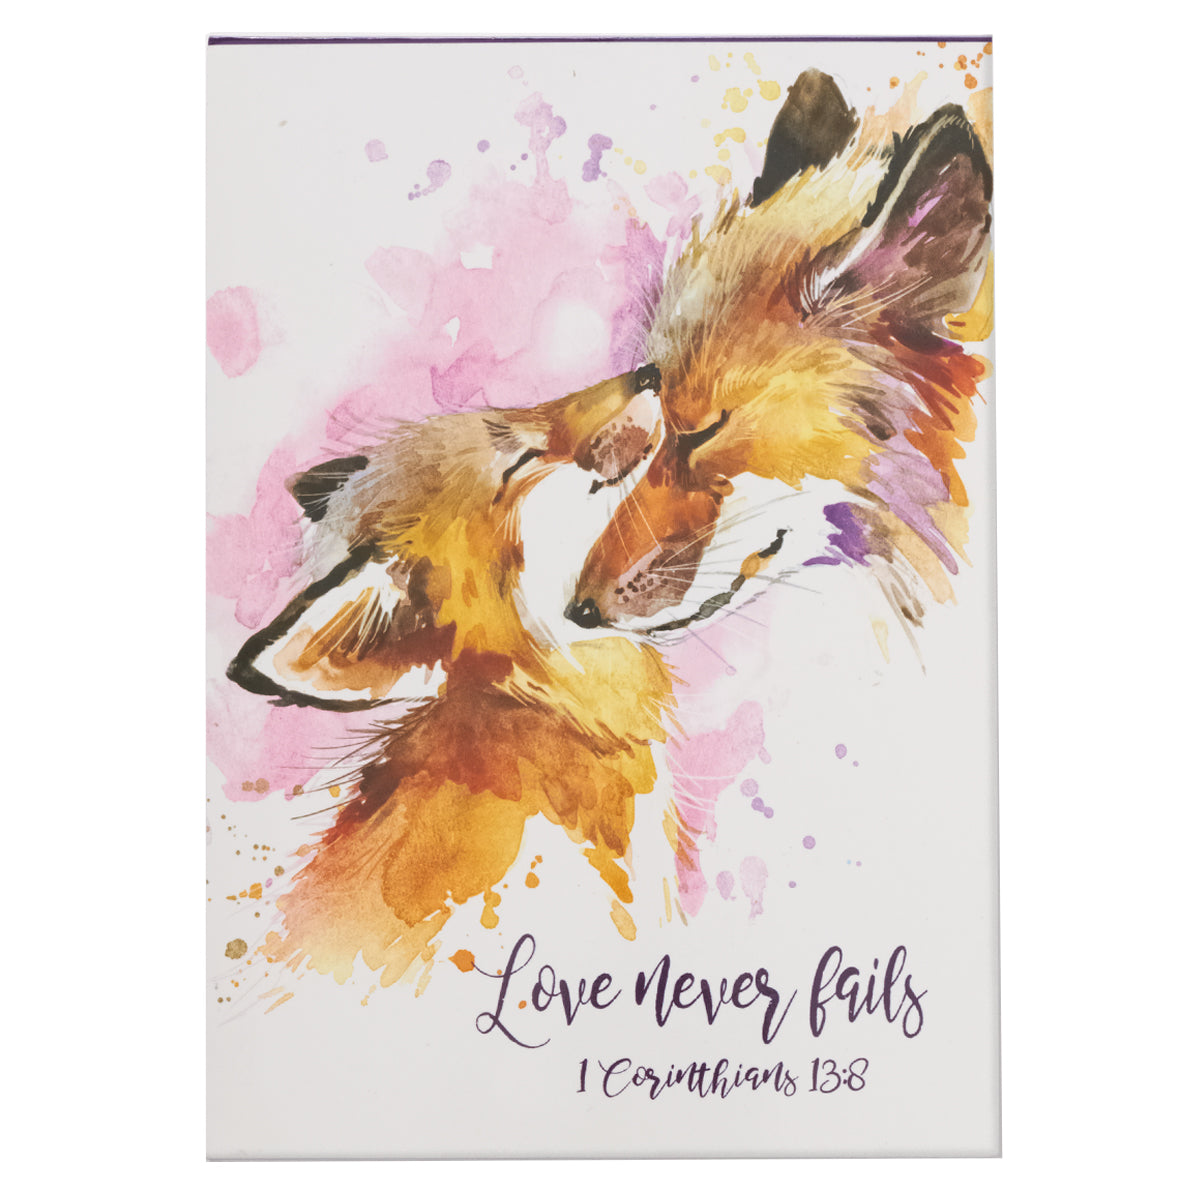 Image of Love Never Fails Illustrated Pet Notepad - 1 Corinthians 13:8 other